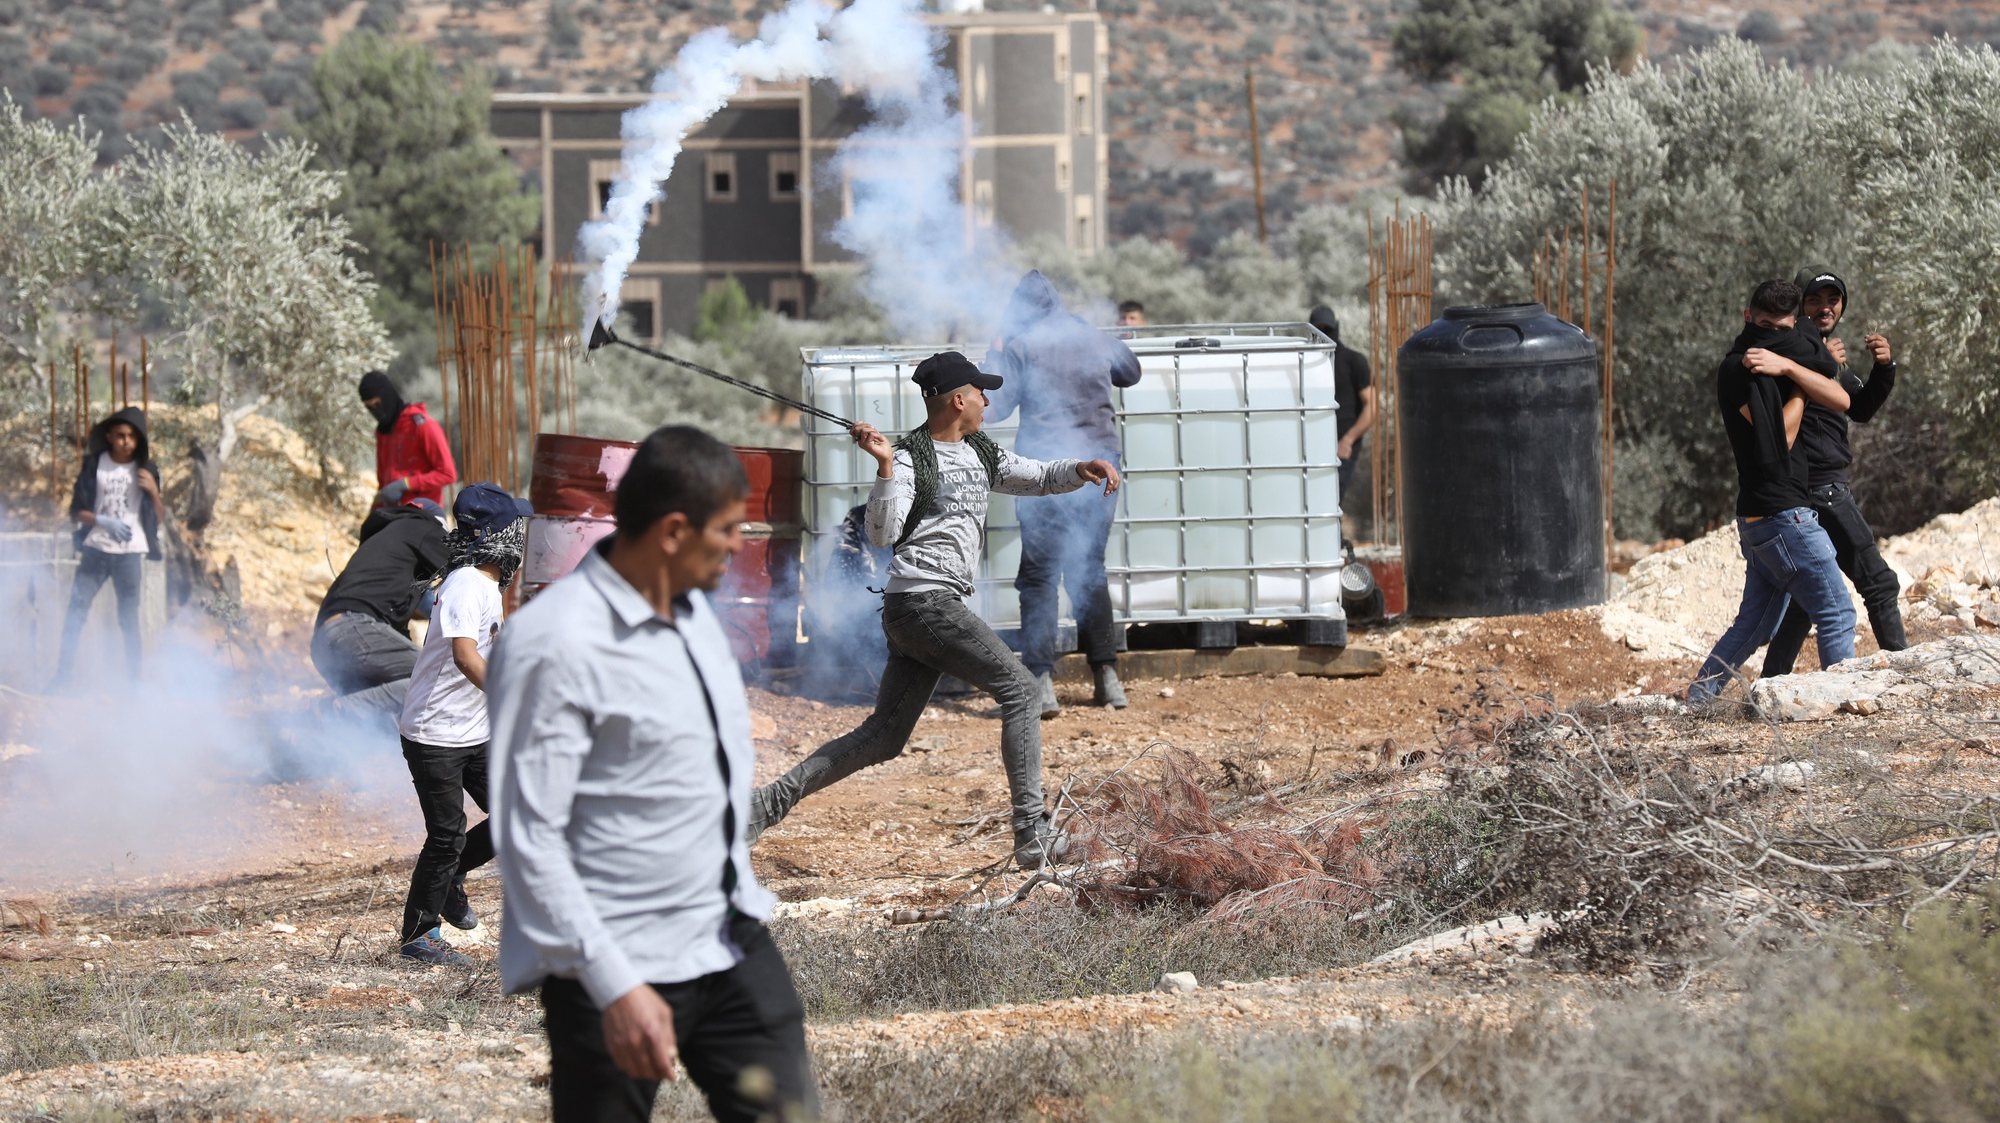 epa09485731 A Palestinian protestor throws back a tear gas grenade during clashes with Israeli security forces after a protest against Israeli settlements, on the lands of Beita village near the West Bank city of Nablus, 24 September 2021.  EPA/ALAA BADARNEH